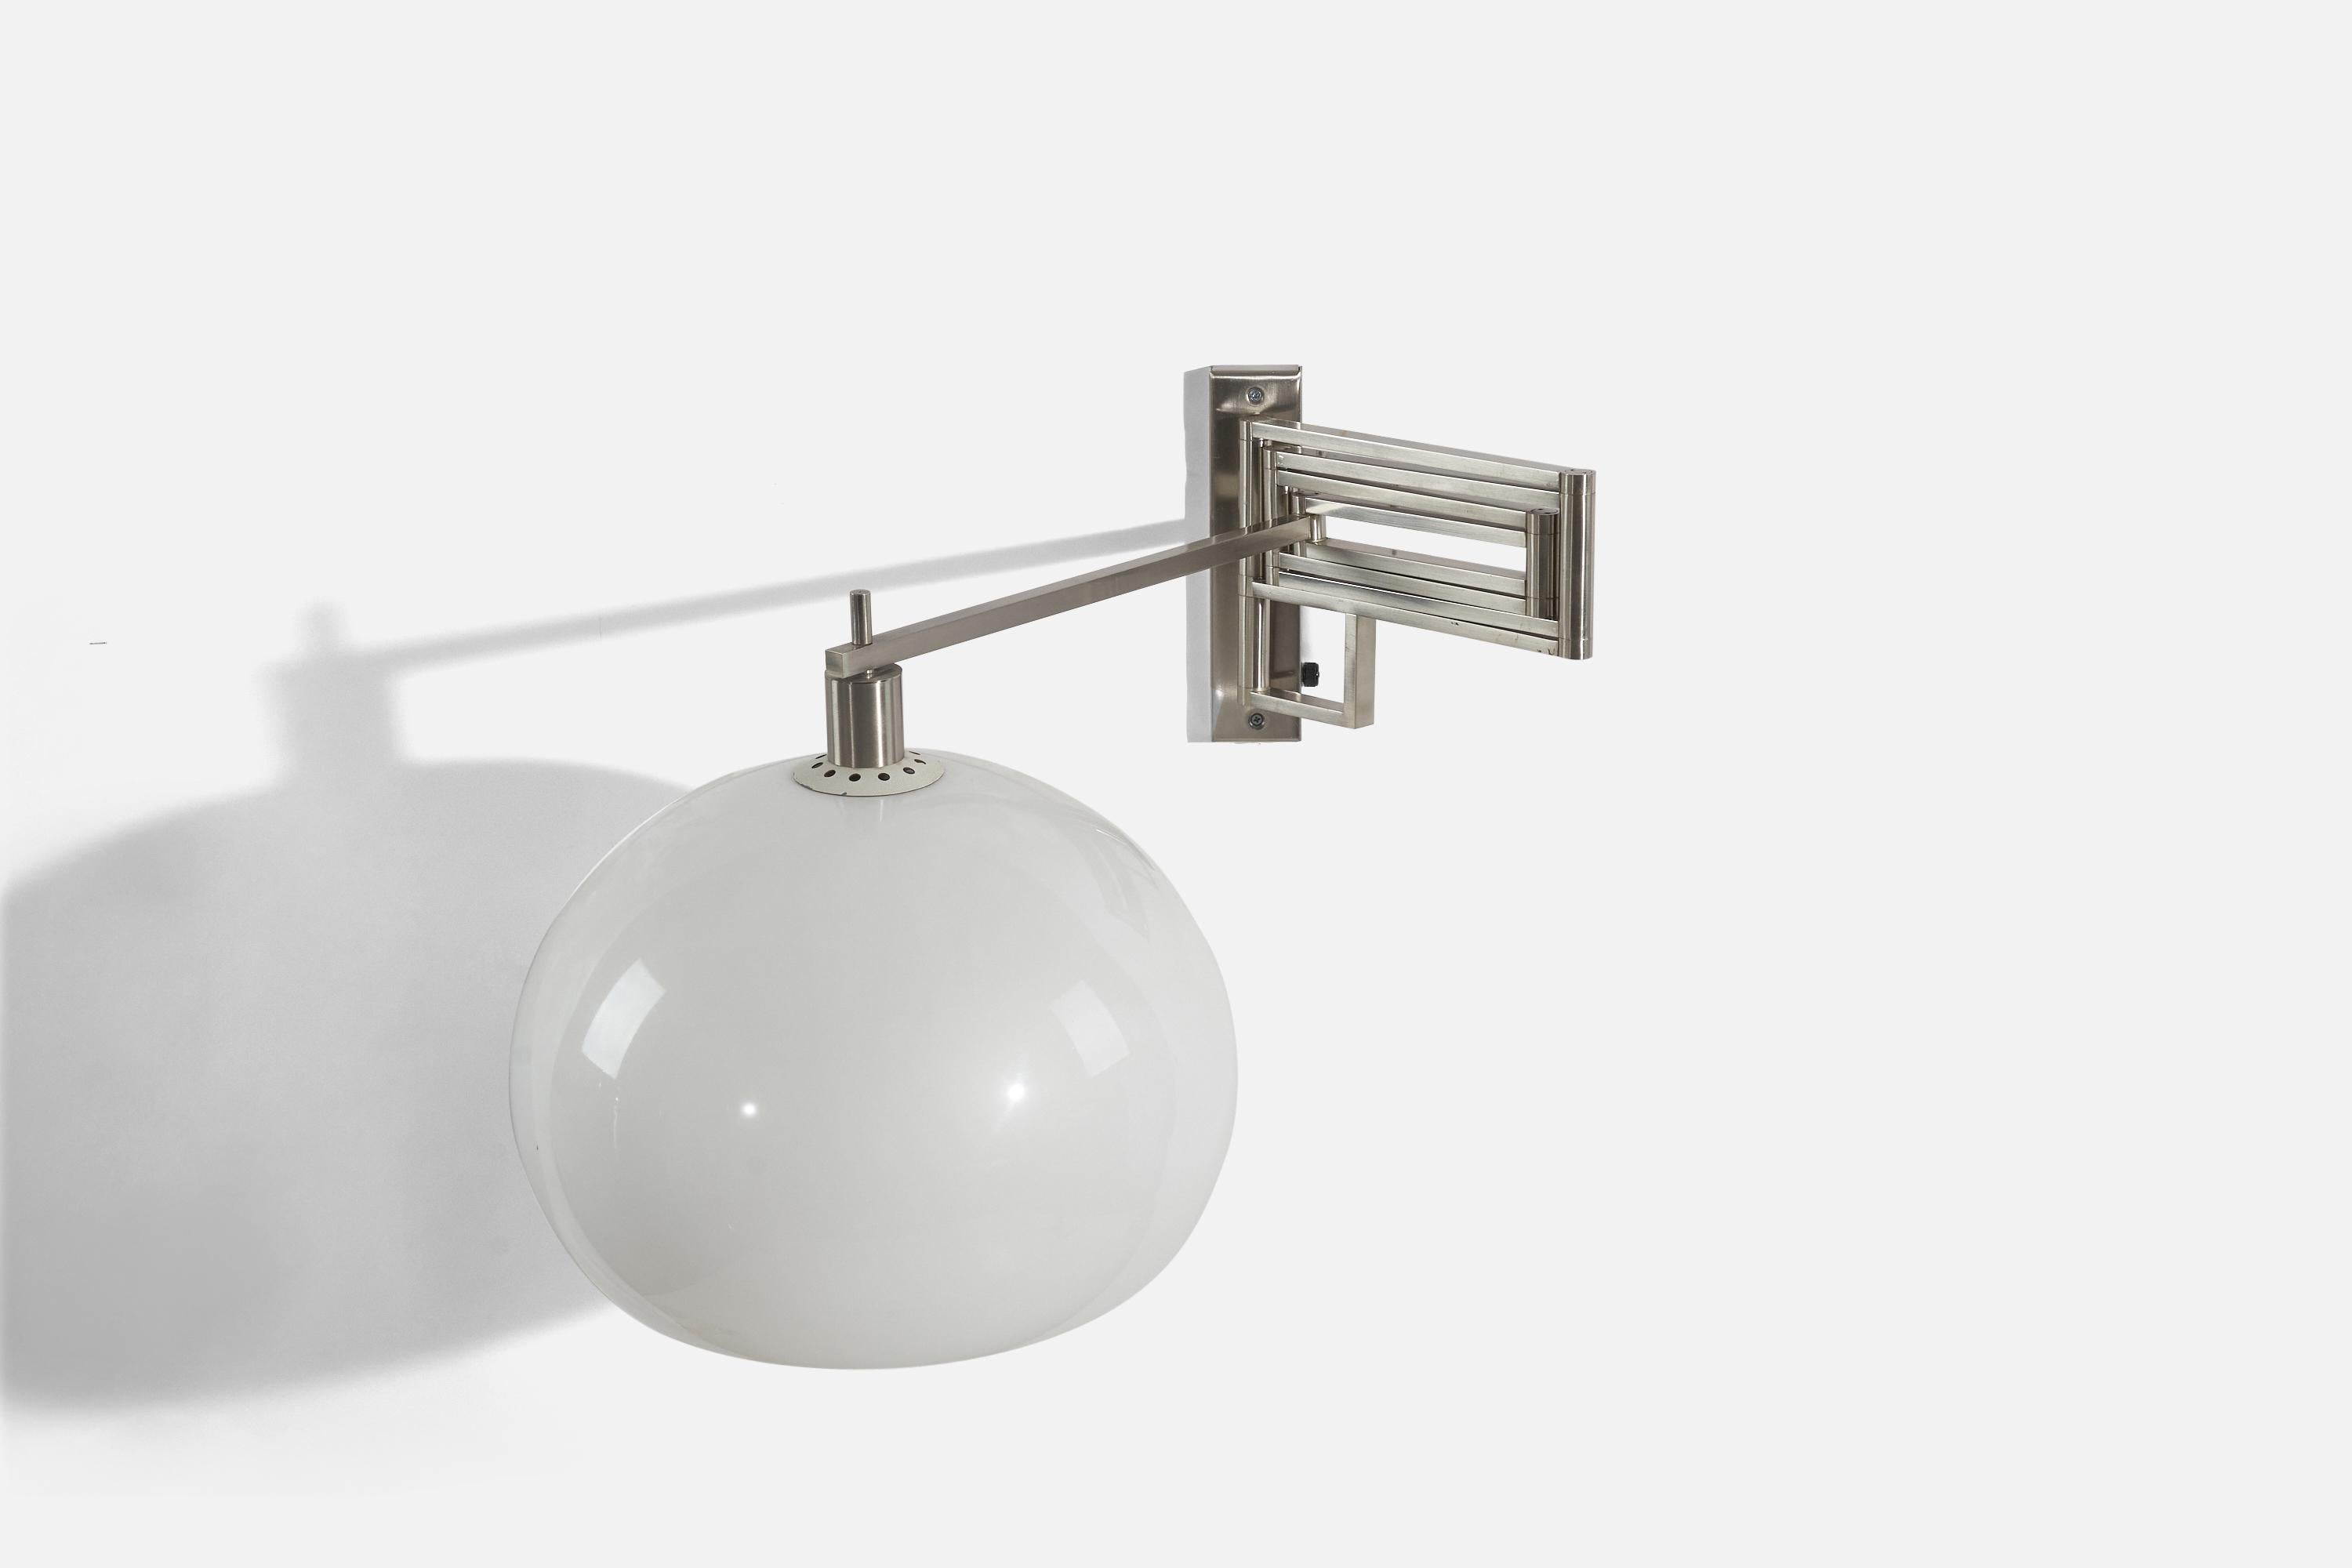 A steel and acrylic wall light design and production attributed to Arteluce, Italy, c. 1960s.

Variable dimensions, measured in the wall light's maximum extended position. 
Dimensions of back plate (inches) : 9.87 x 2.37 x 0.87 (height x width x